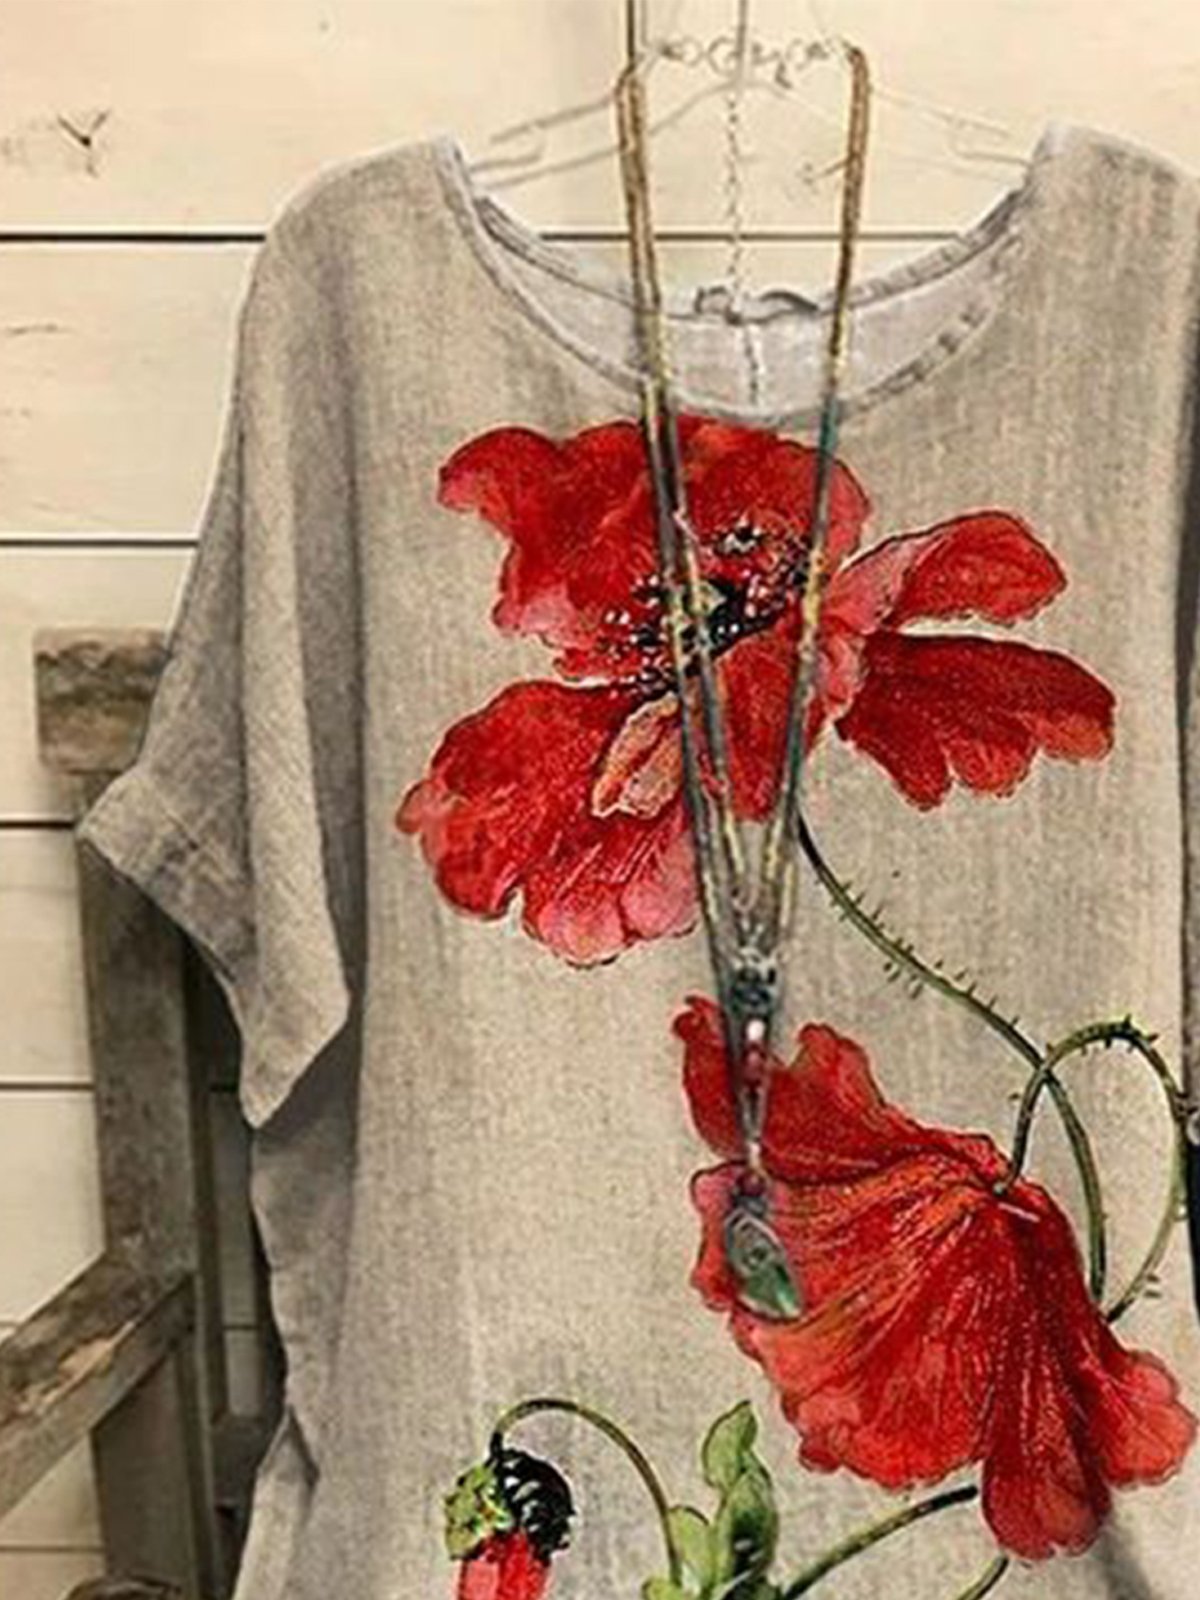 JFN Crew Neck Floral Casual Red Flower Batwing Sleeve Slit Top